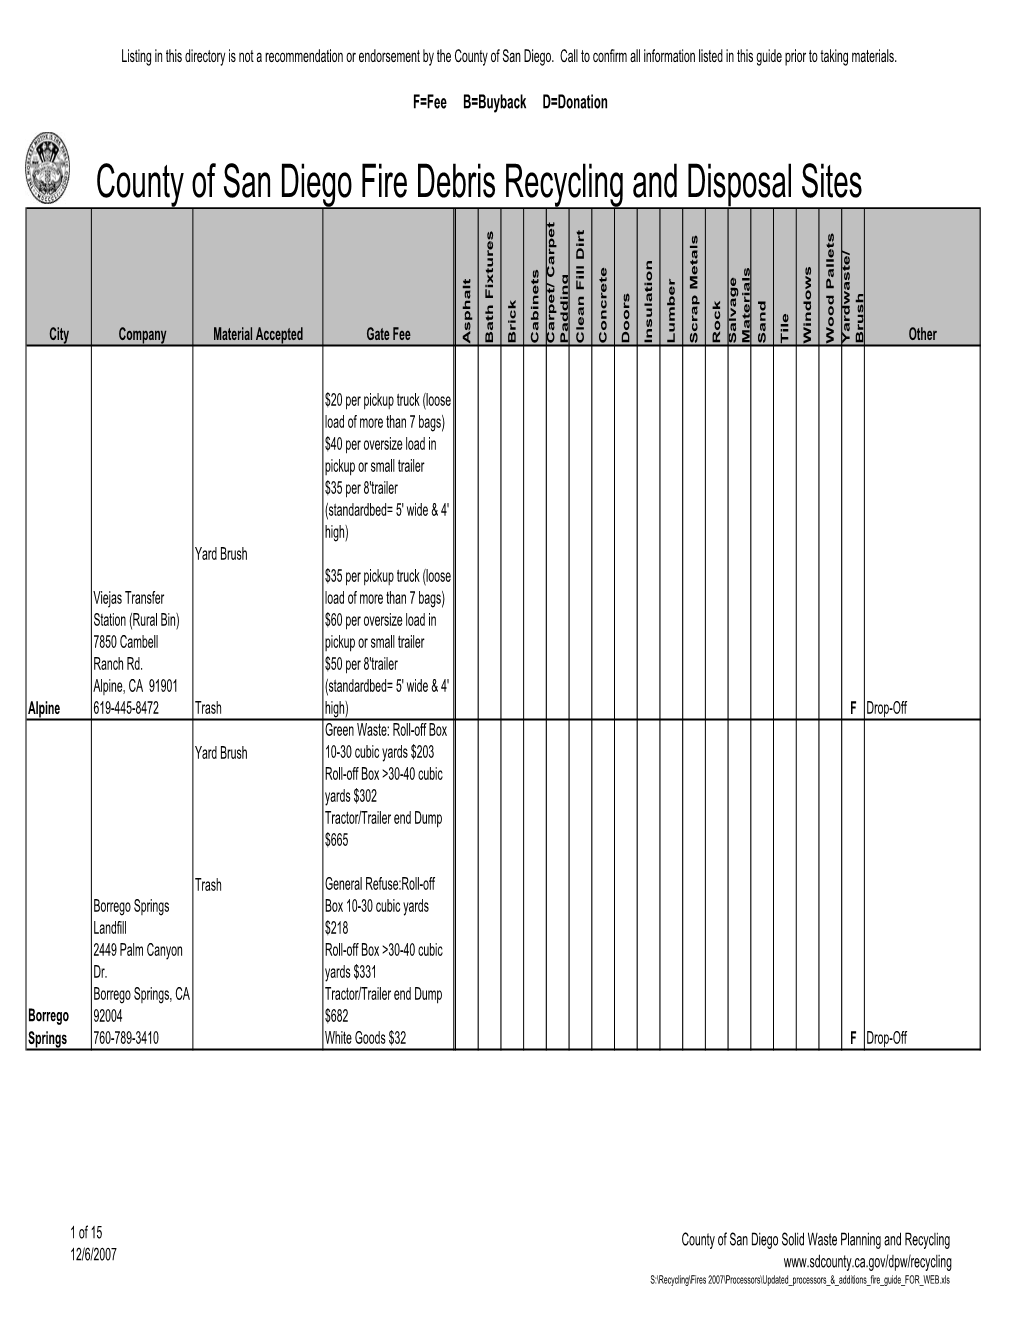 County of San Diego Fire Debris Recycling and Disposal Sites